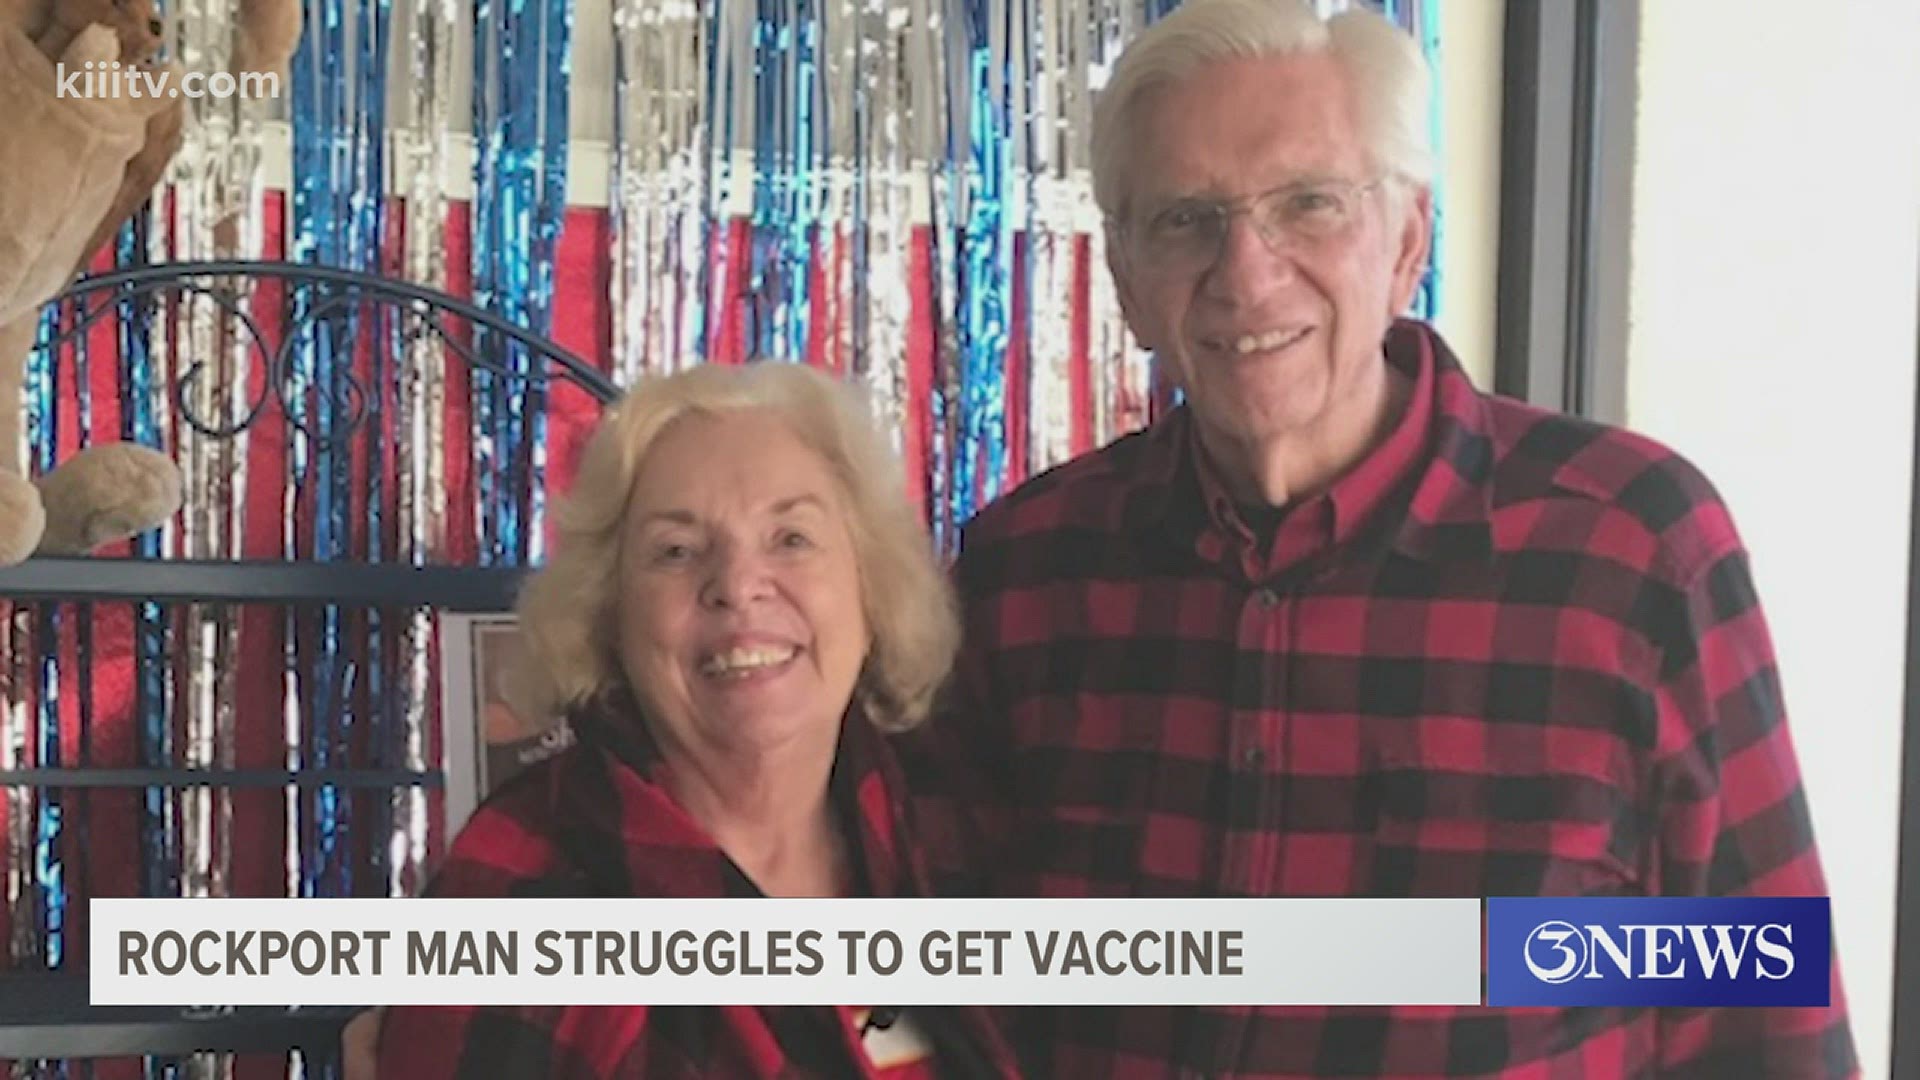 David Murrah and his wife left their home at 4:30 in the morning on Friday hoping to make it to Robstown in time to get vaccinated.